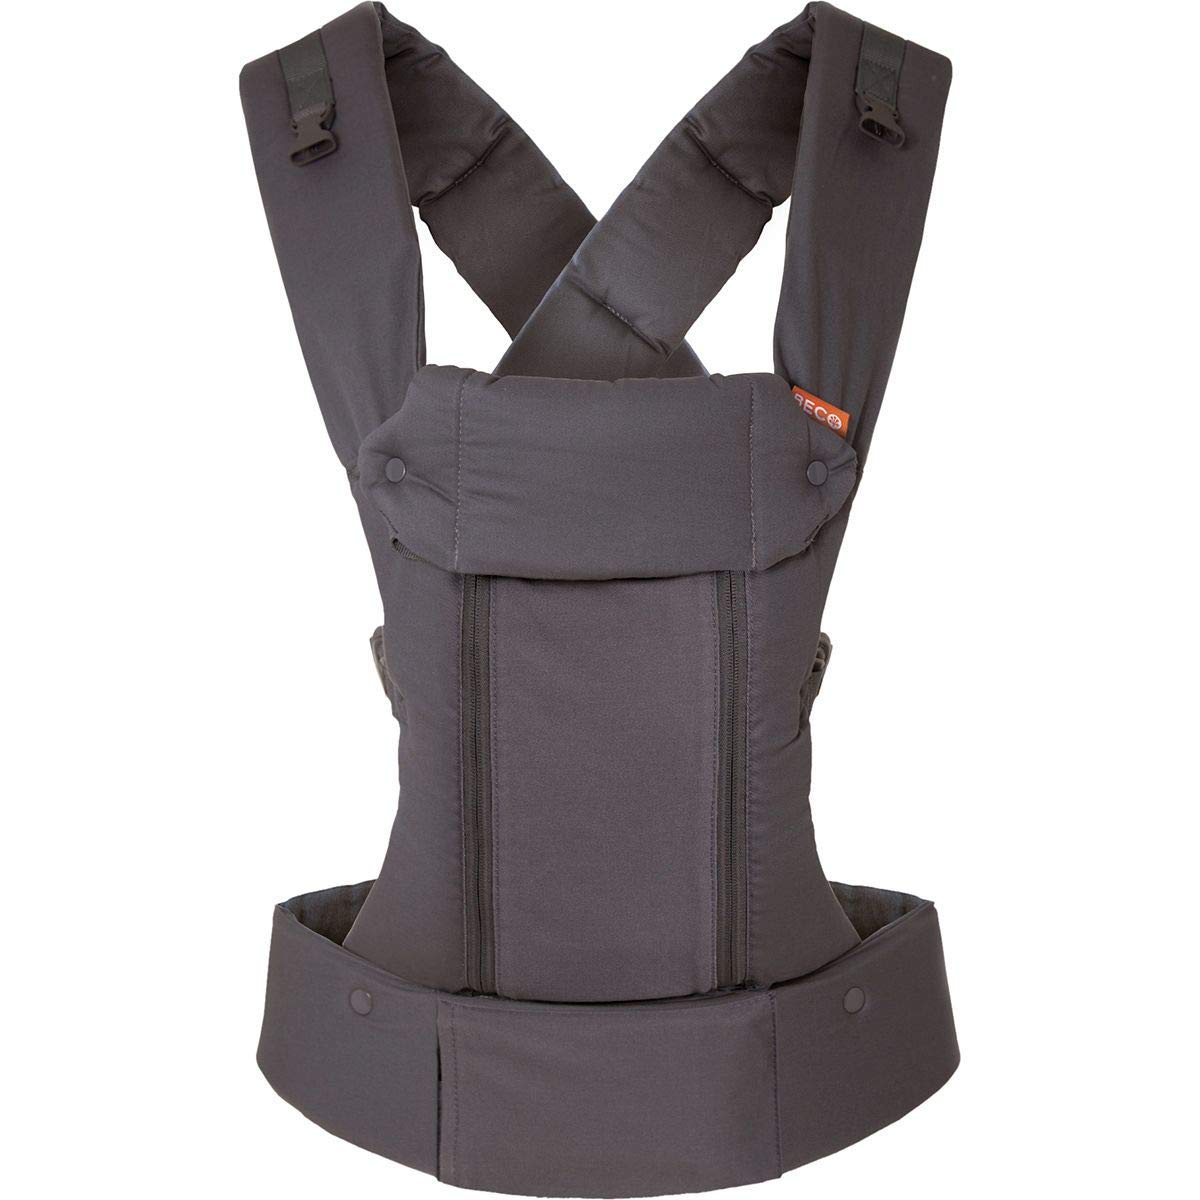 Beco 8 Baby Carrier from Birth - Dark Grey - Vented Back Including Newborn Insert - For Babies from 3.2 to 20 kg - 0 to 48 Months